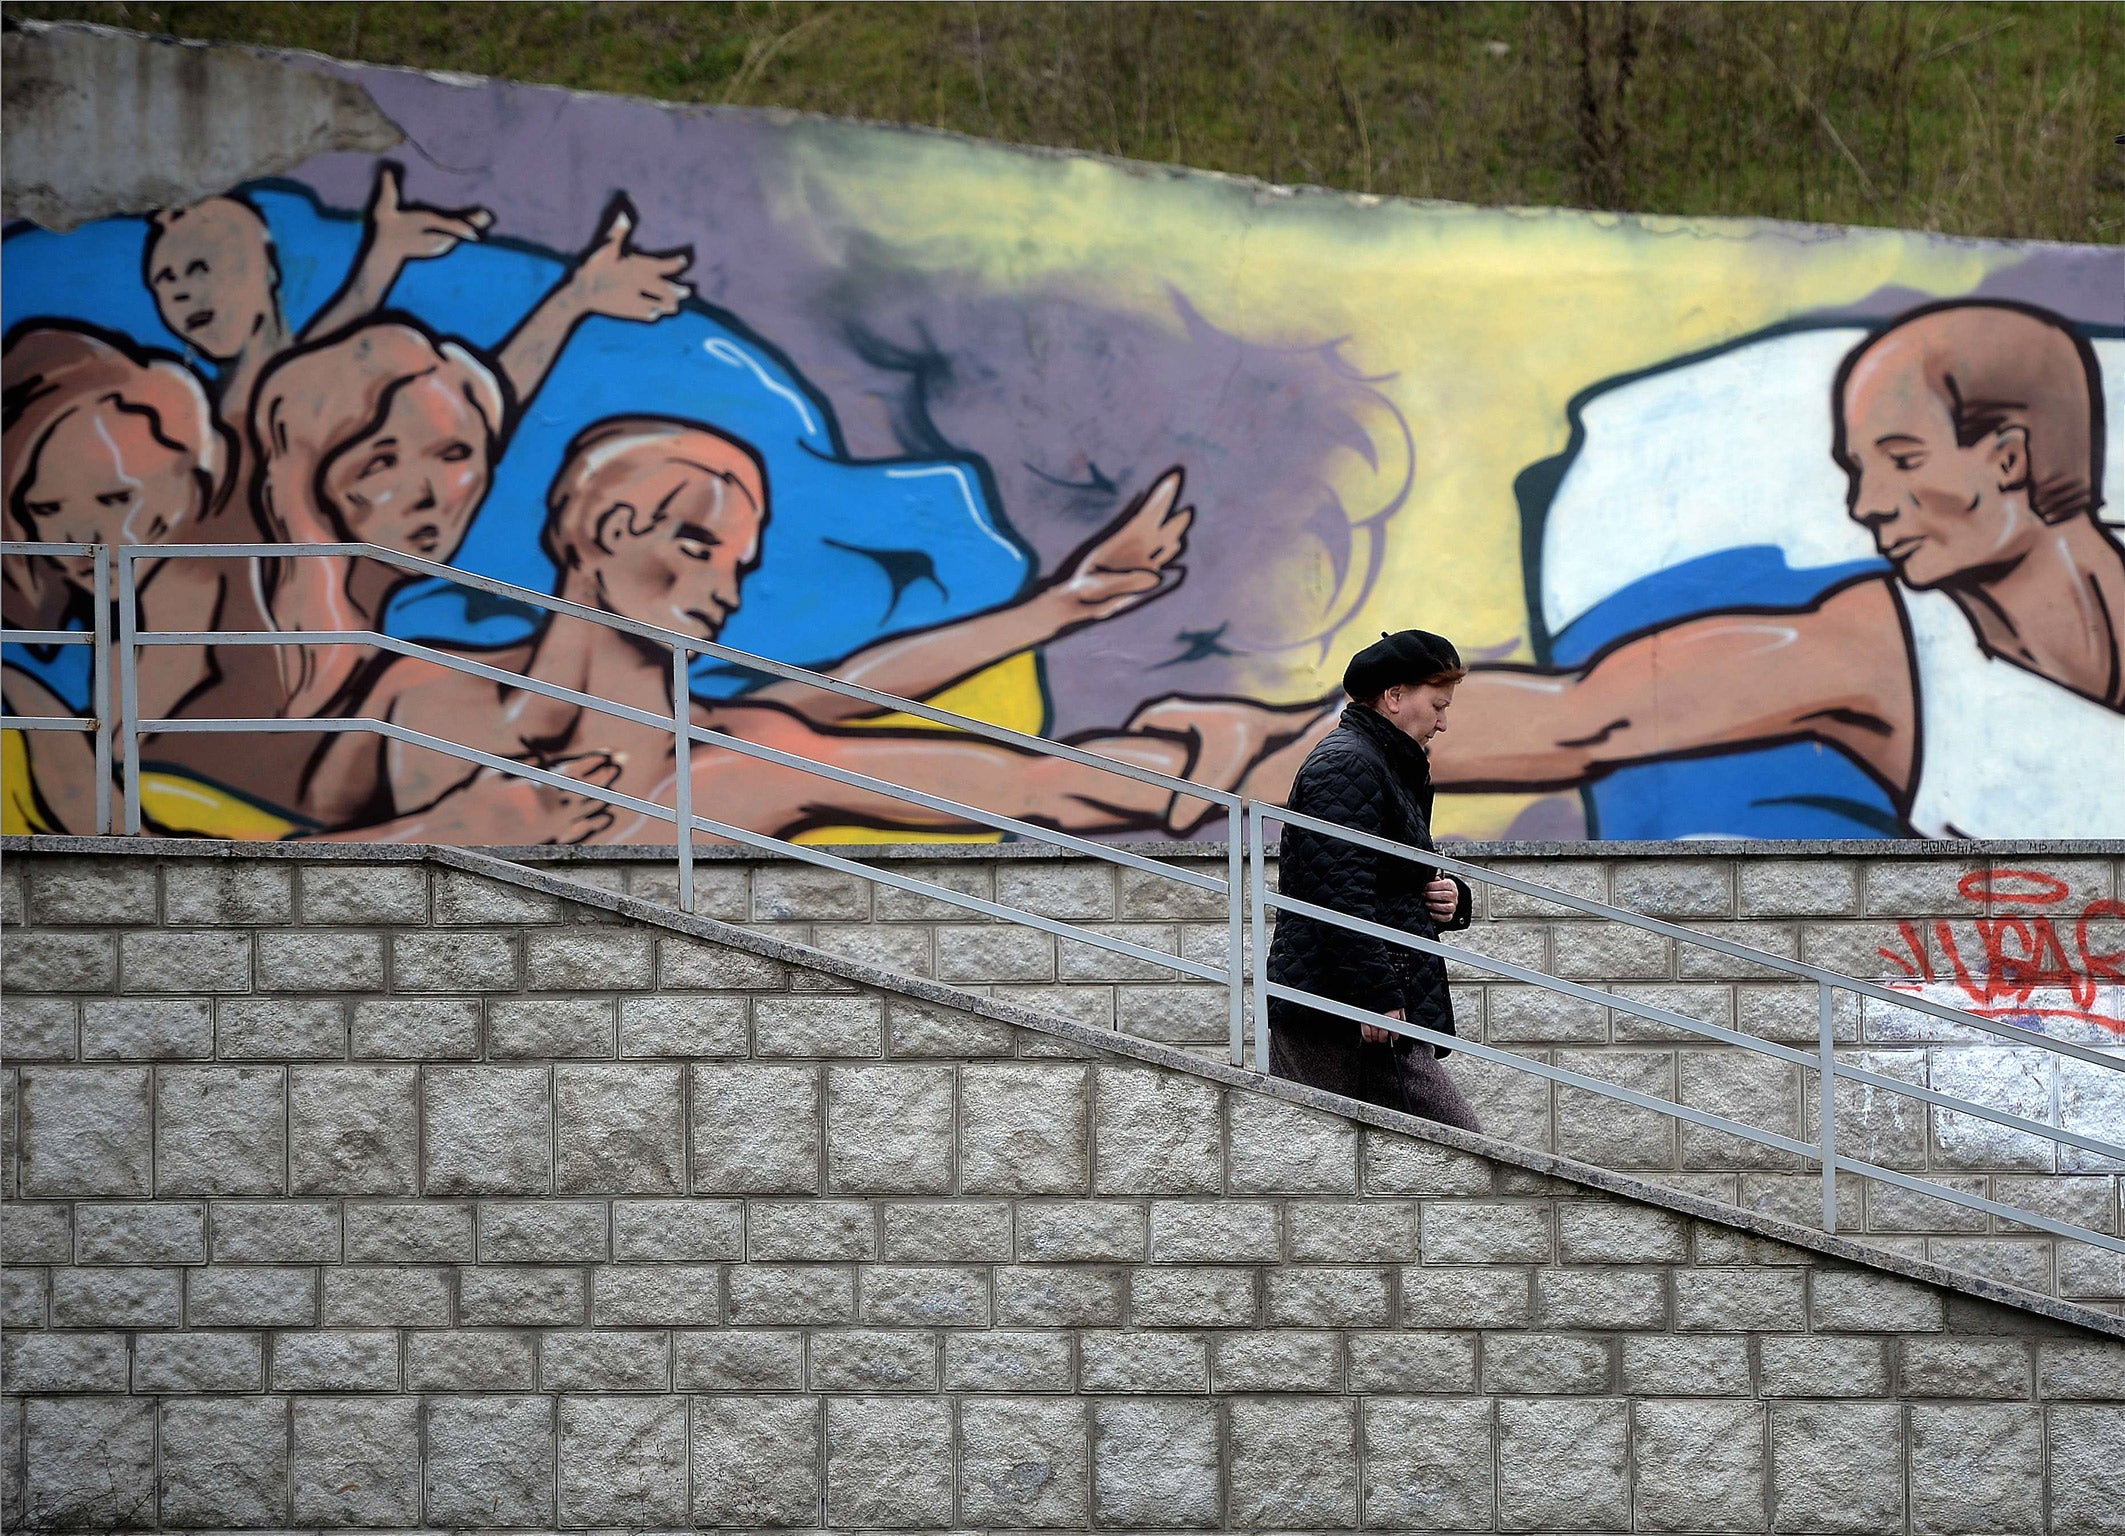 A mural in Simferopol depicts Vladimir Putin giving a hand to Ukrainians